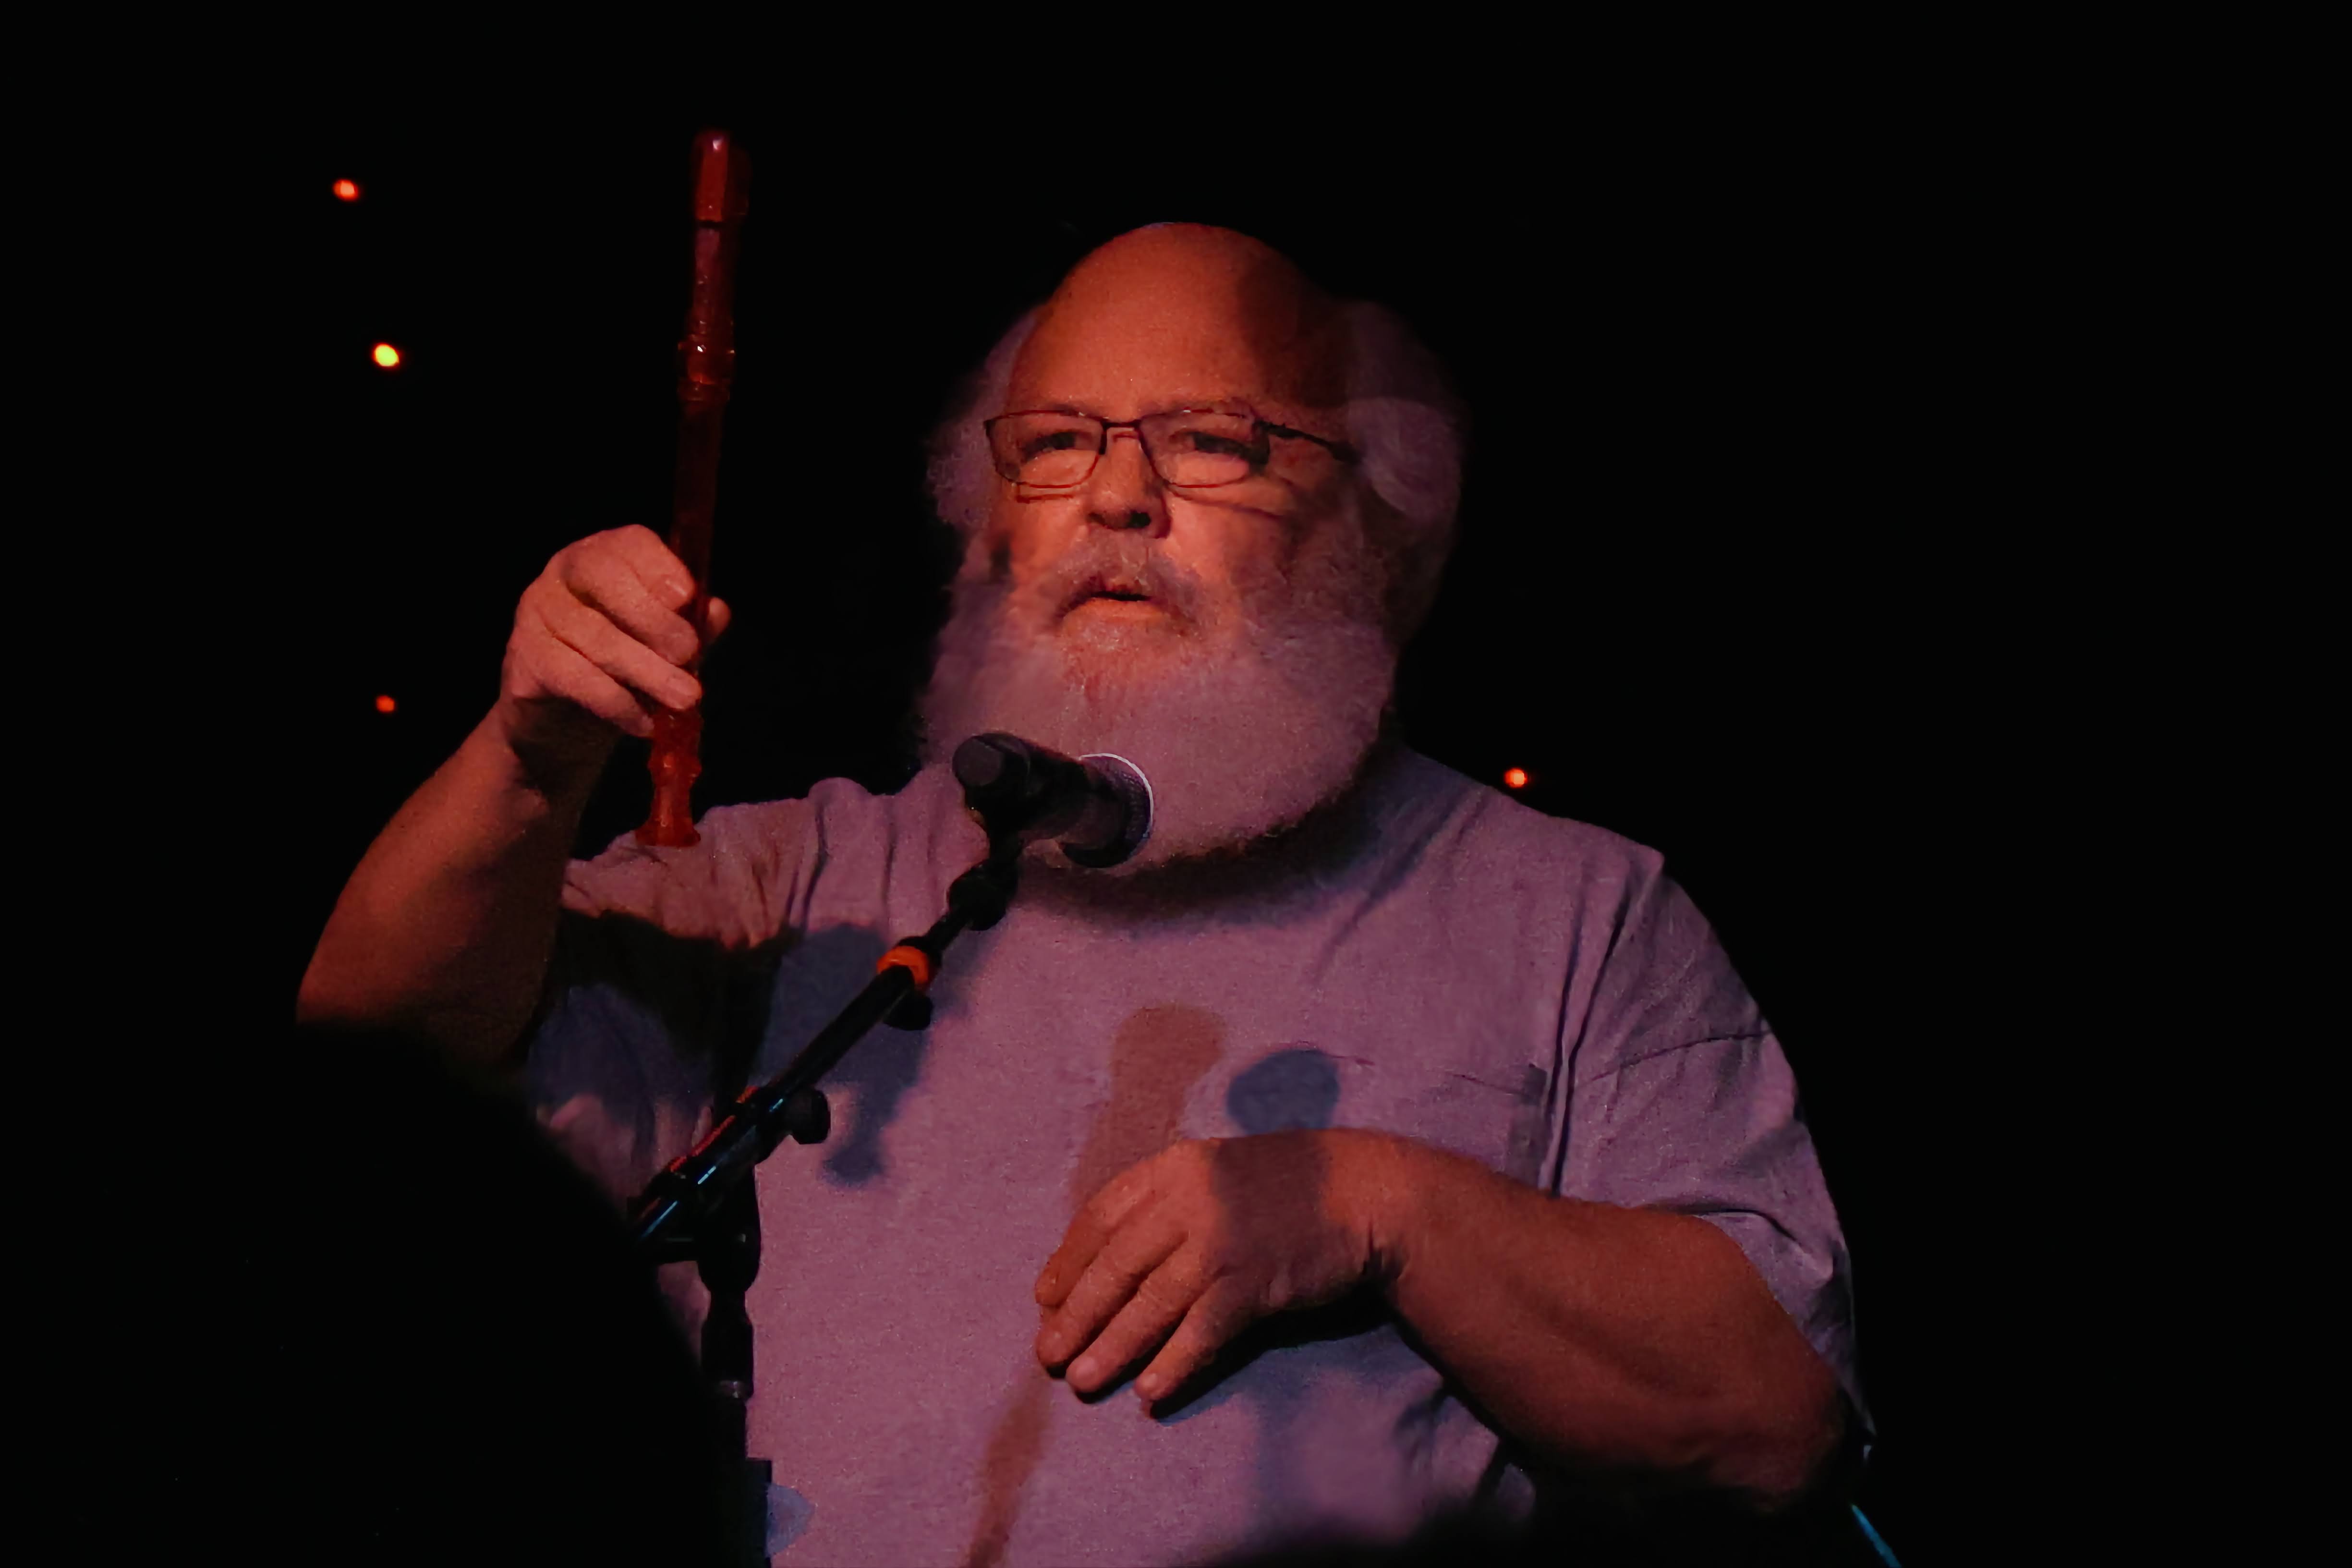 Kyle Gass' ripping recorder solo